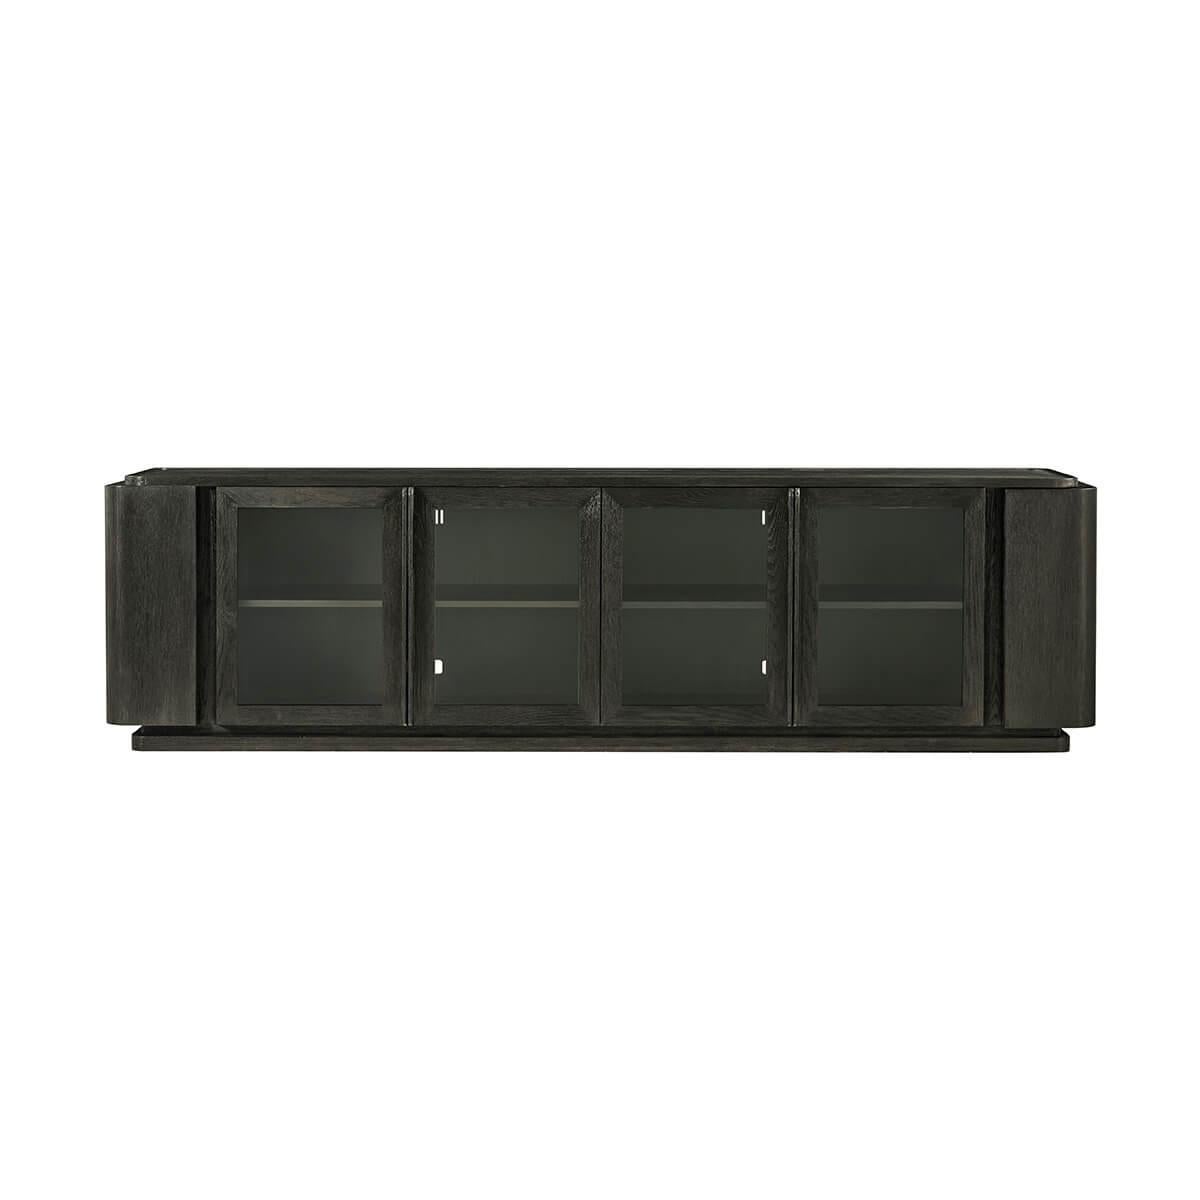 an extra long and low media console in a dark charcoal finish boasting solid Oak and veneer construction that rests on a plinth base.

Hidden on the ends are curved doors that conceal two small shelves to store away small items while the front has